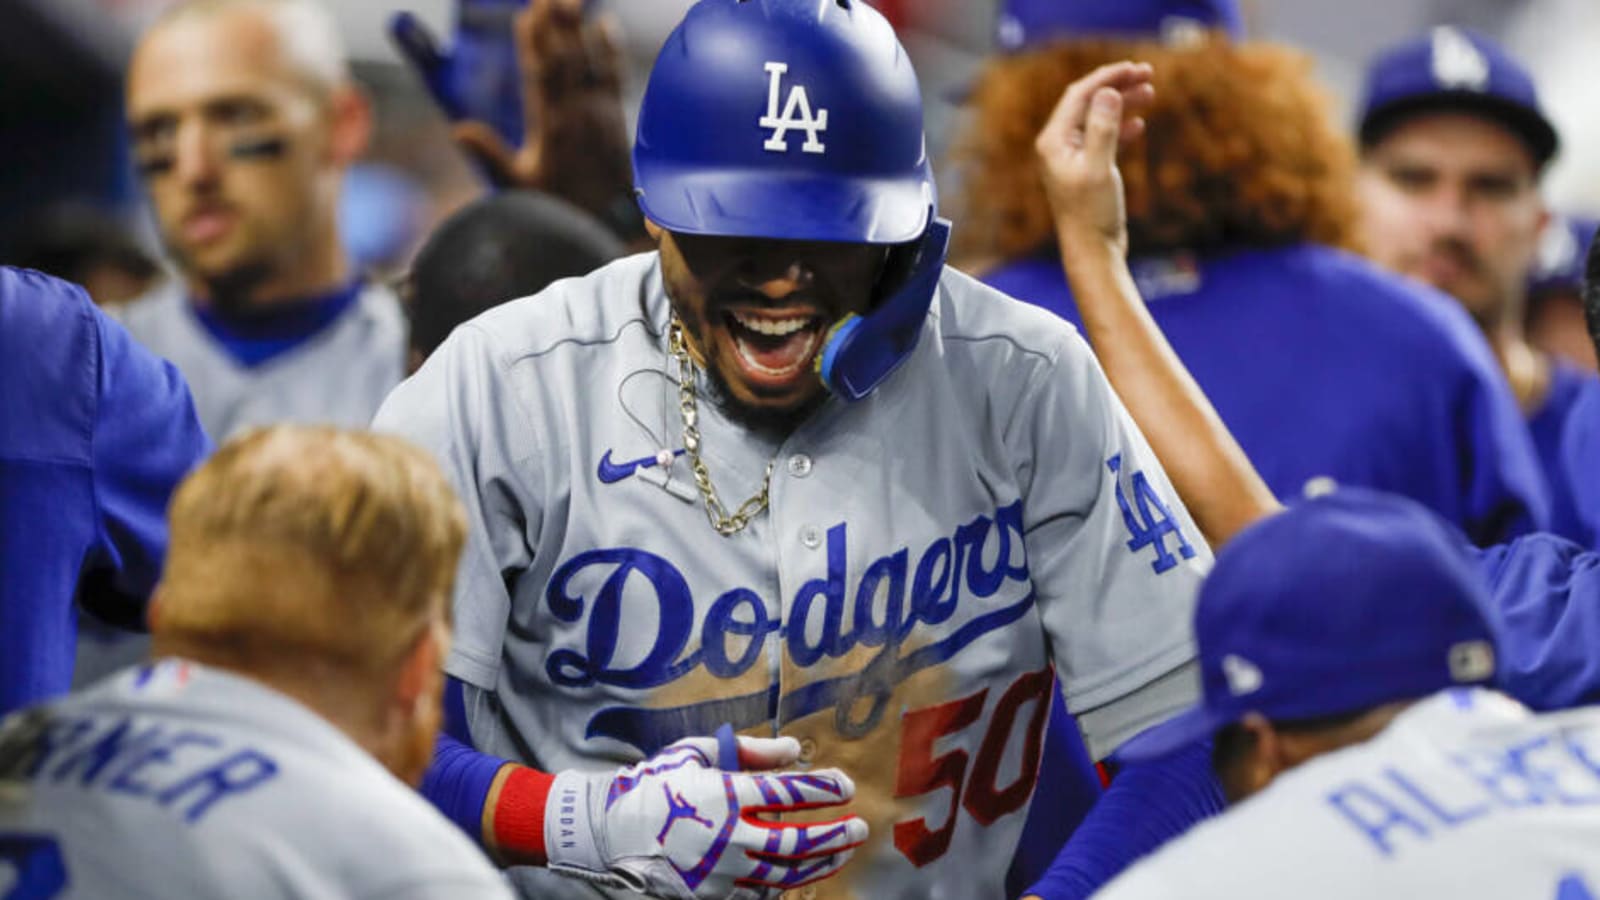 Dodgers Highlights: Mookie Betts’ Two Home Runs, Justin Turner’s Go-Ahead Hit Against Marlins